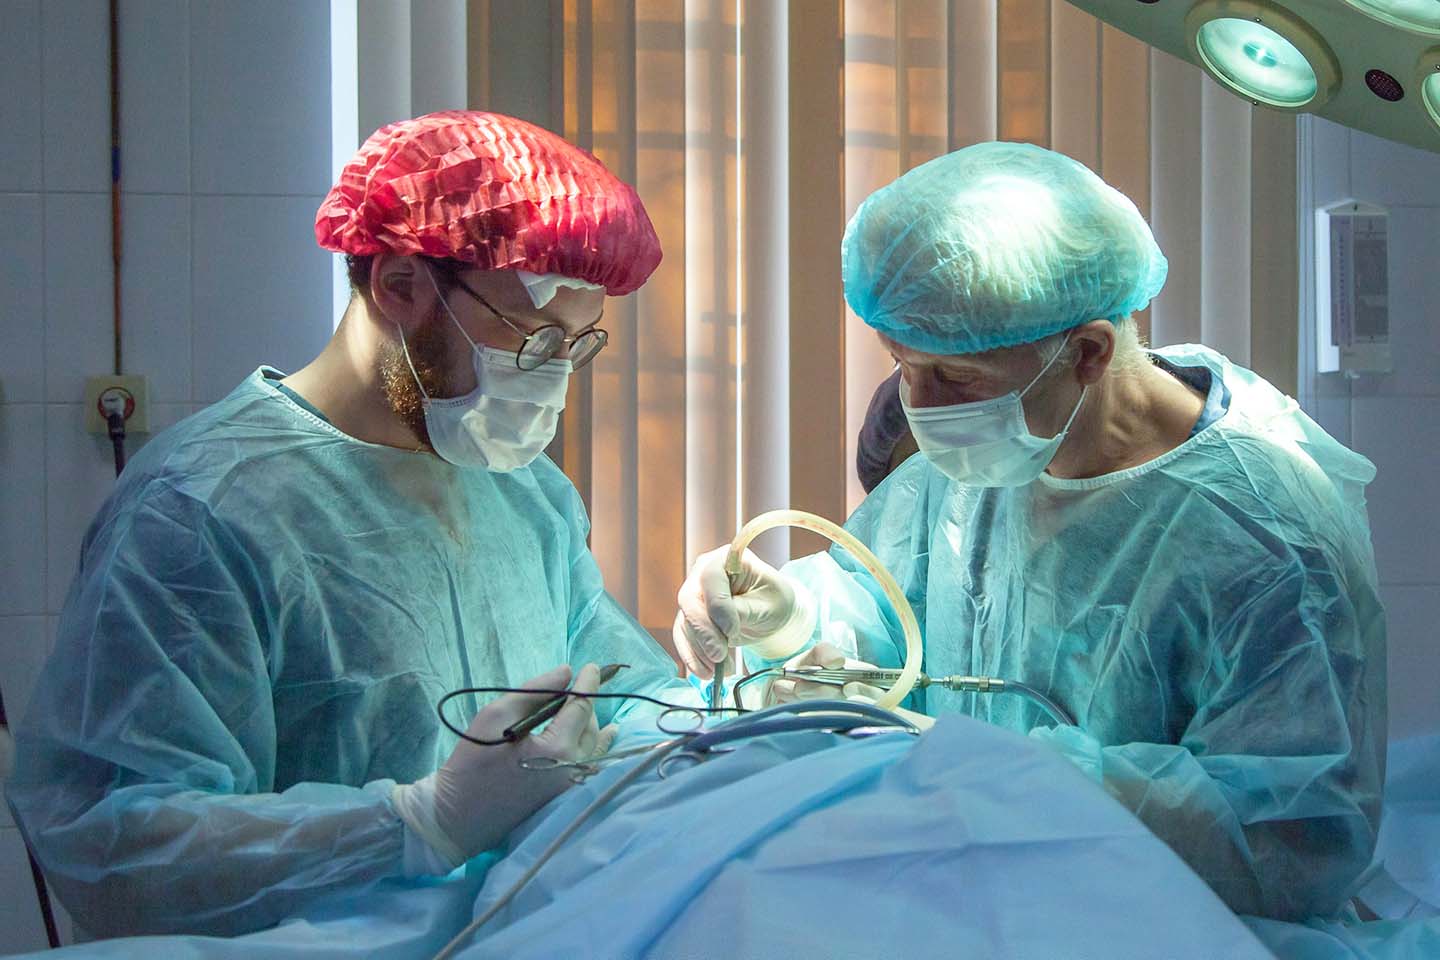 Two surgeons wearing sterile gowns and gloves and doing a surgical operation.